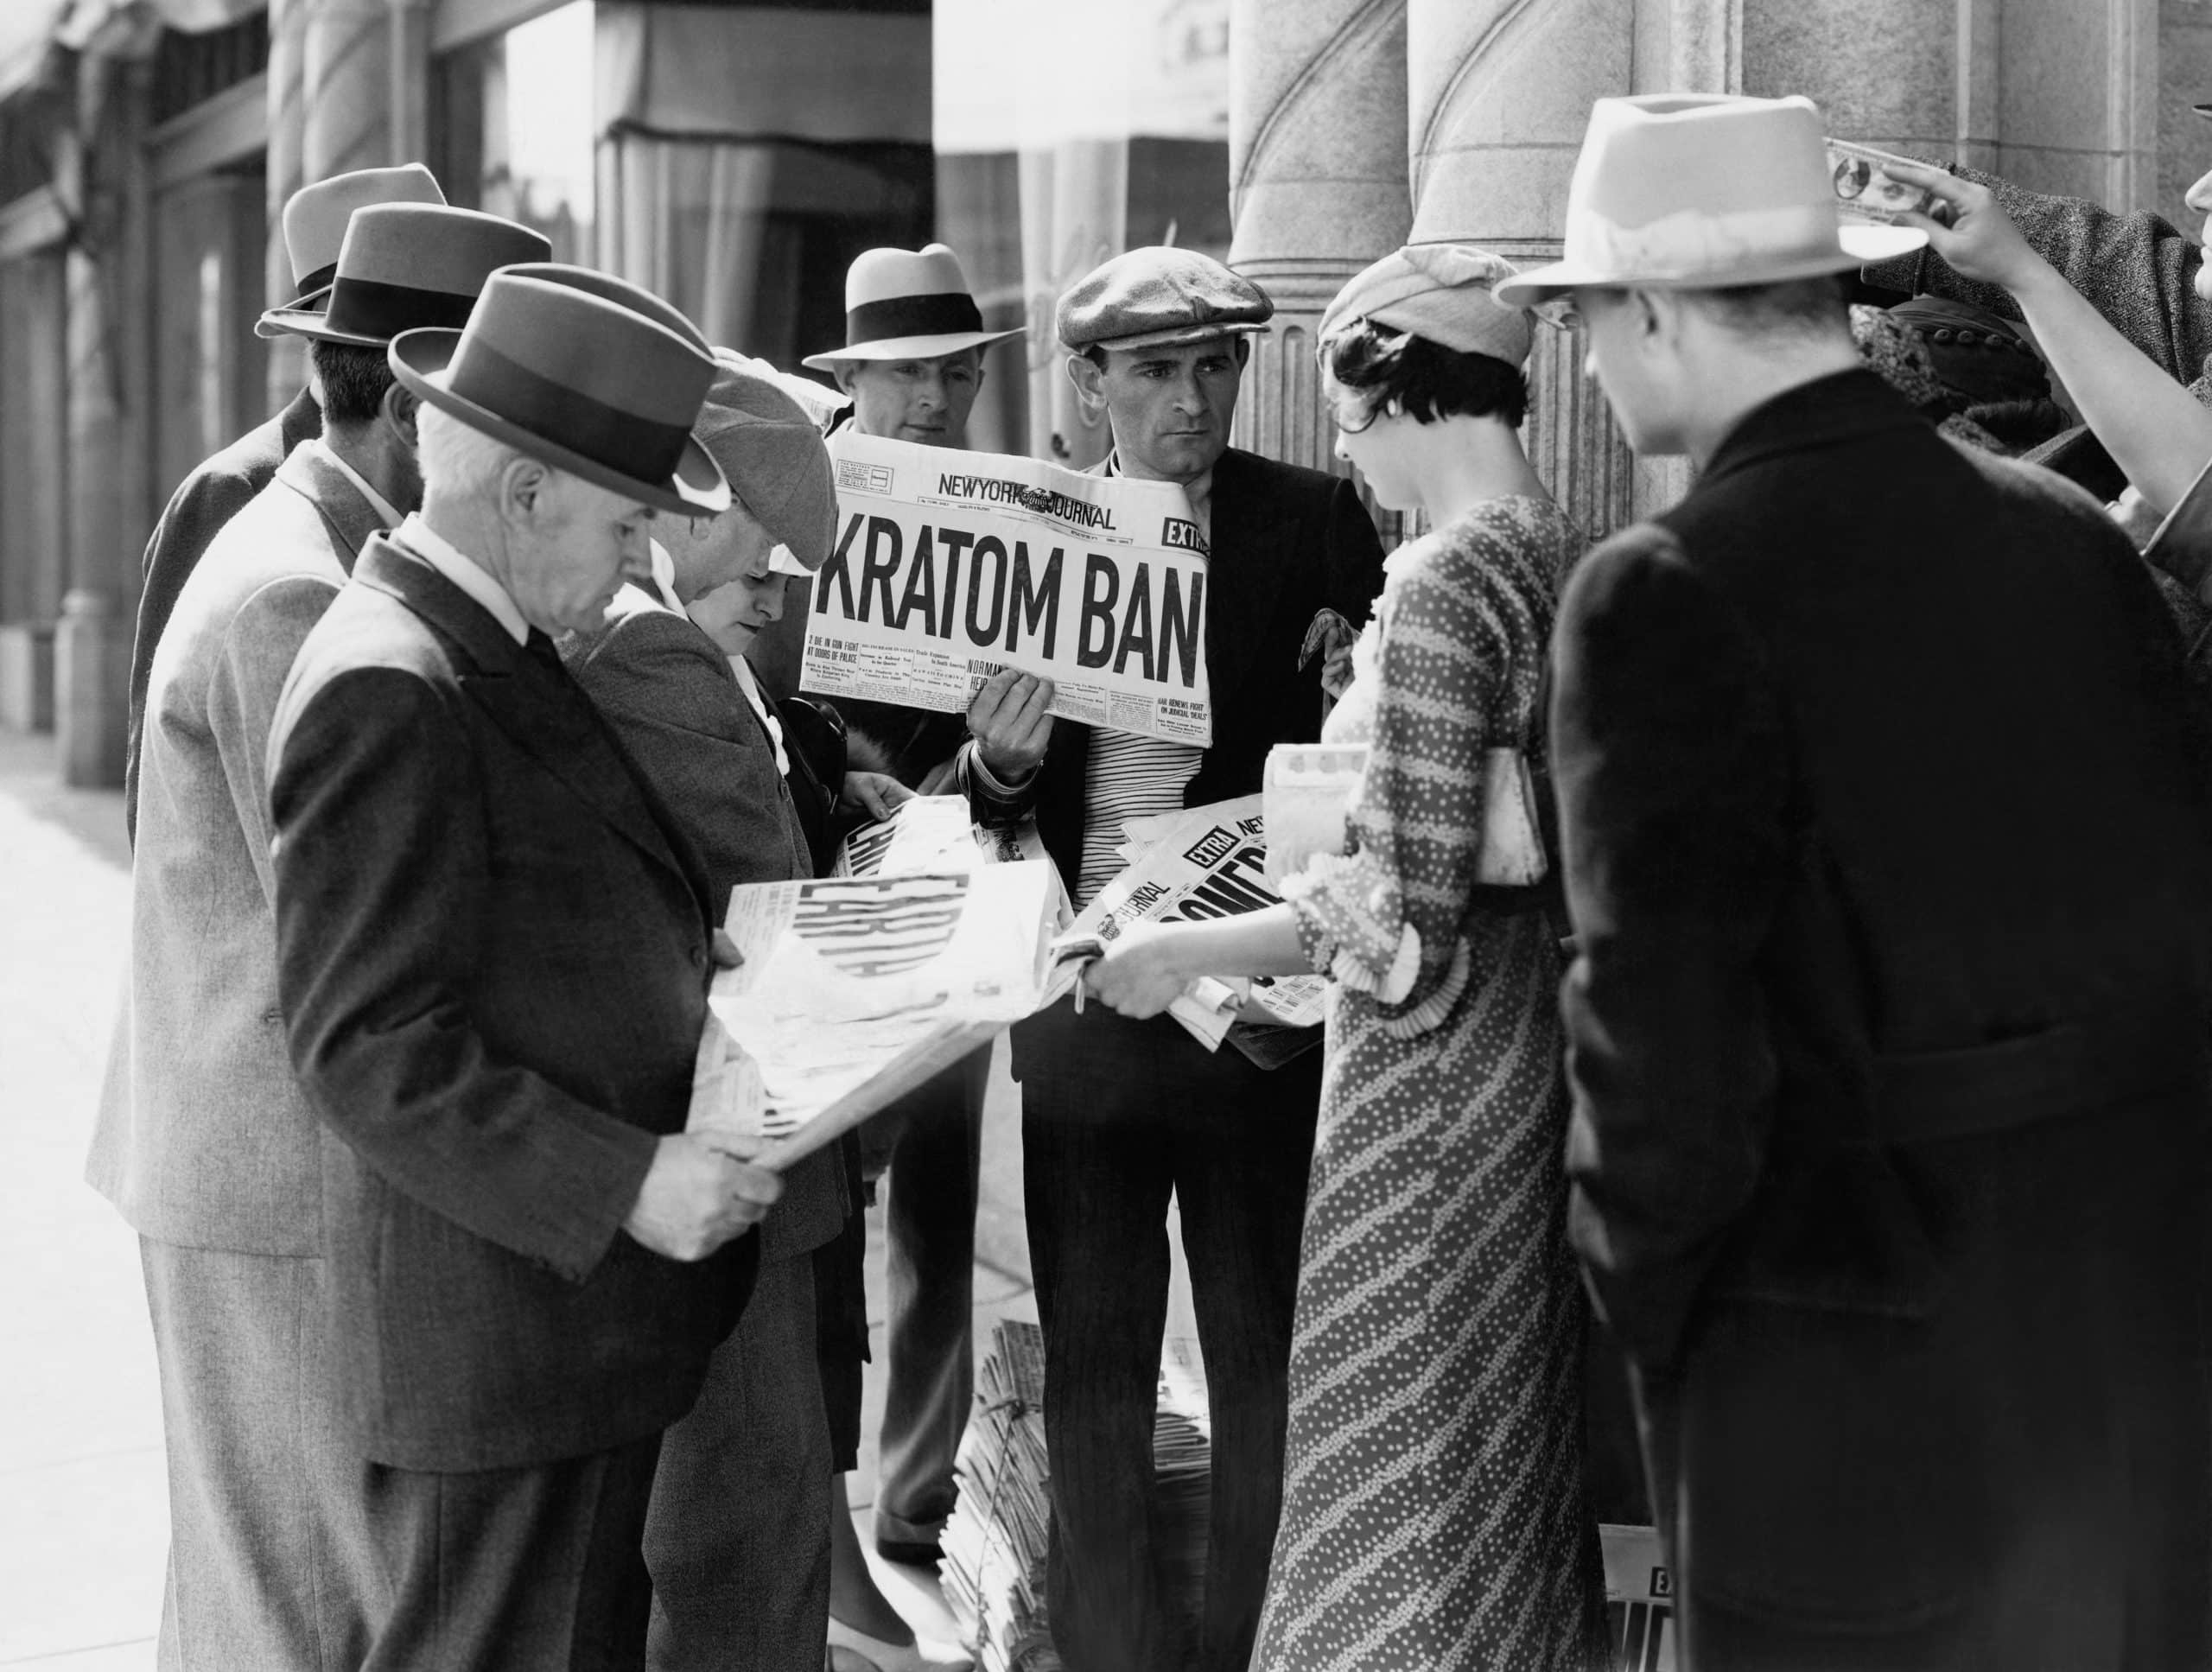 Vintage picture of man holding newspaper that reads "kratom ban"